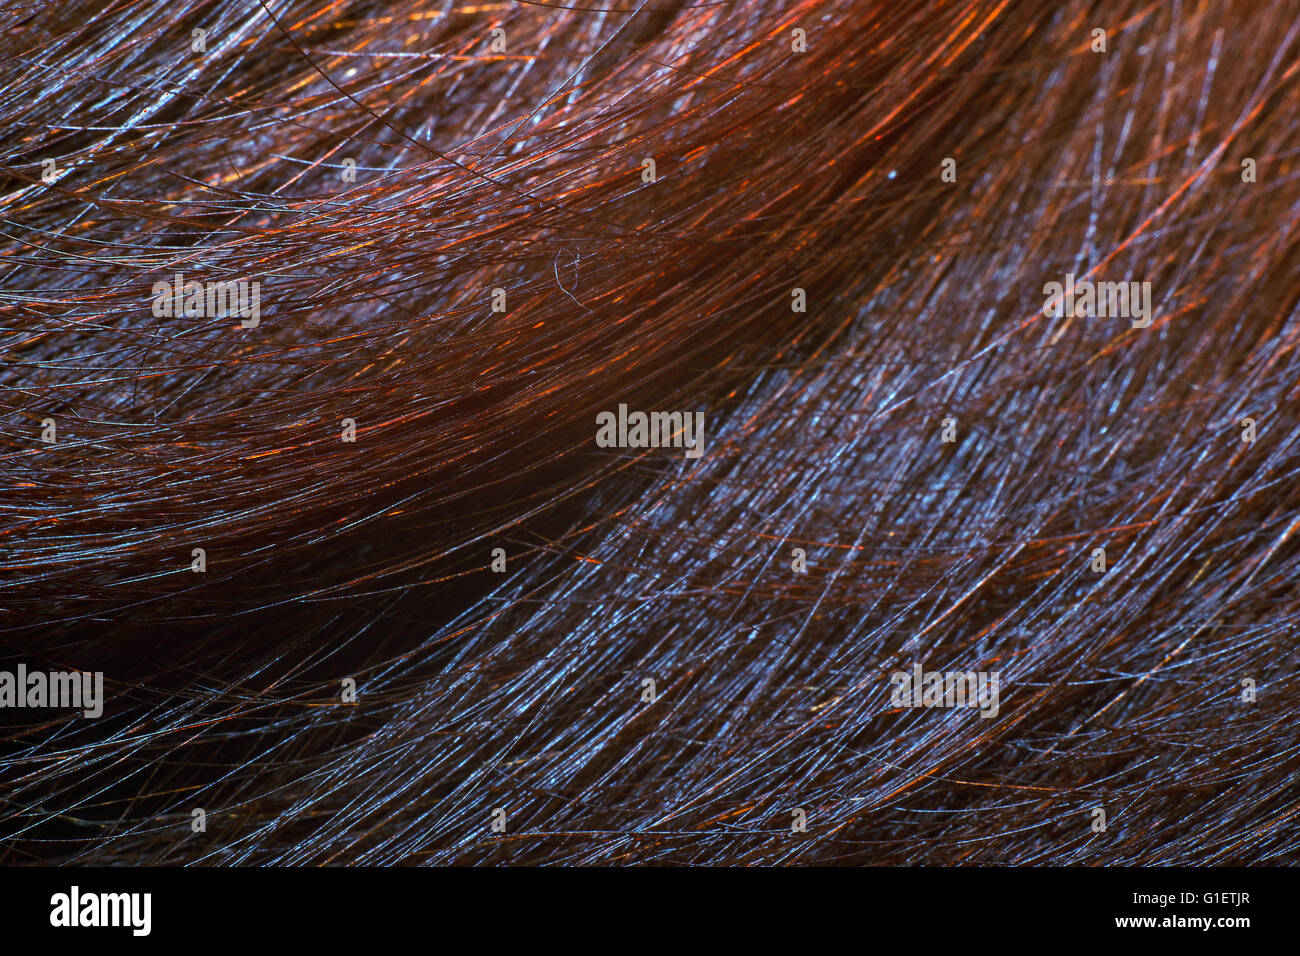 Abstract backgrounds. Closeup of a human hair. Stock Photo